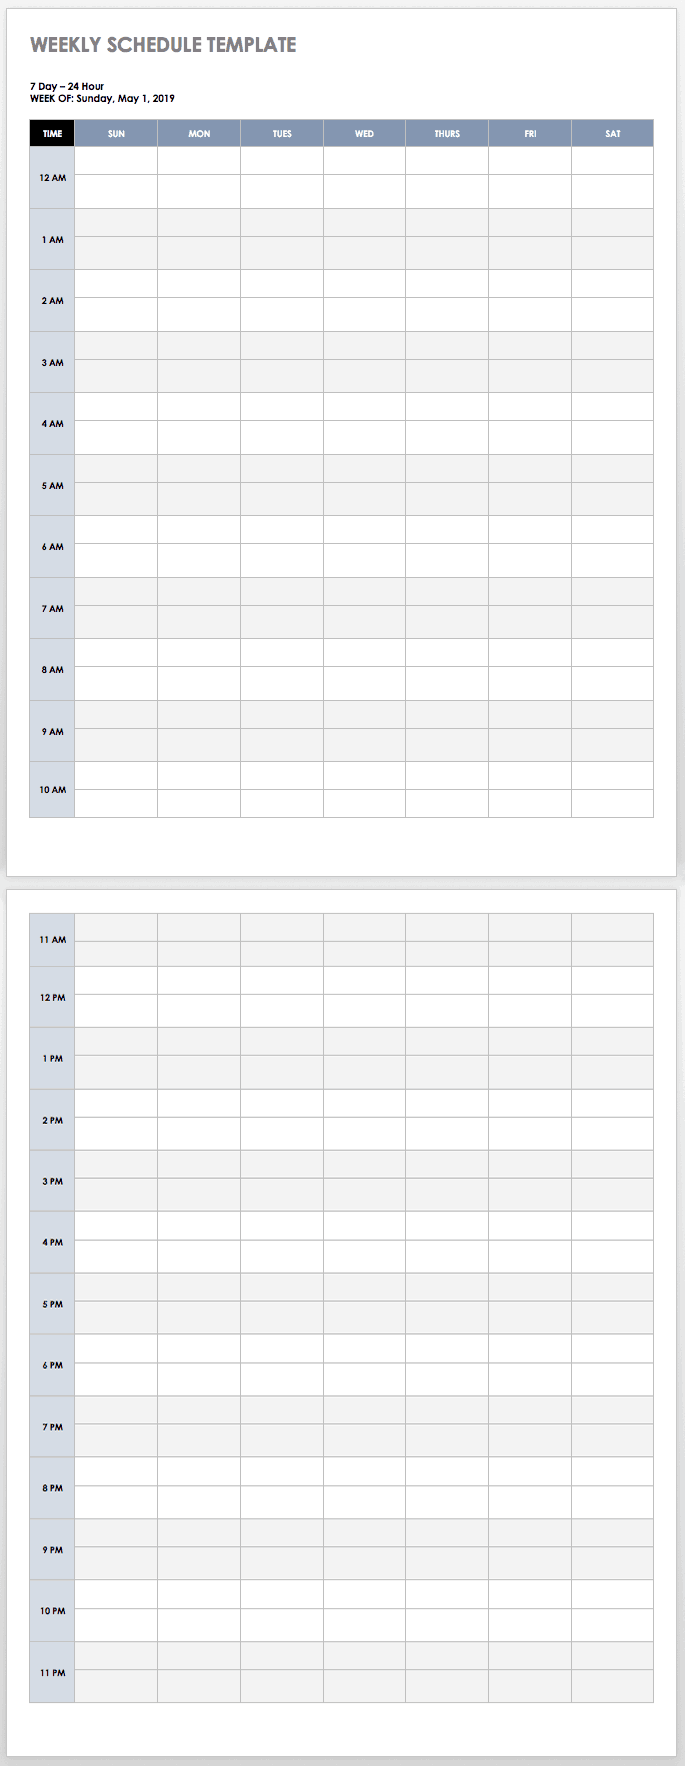 Exercise Chart Template from www.smartsheet.com